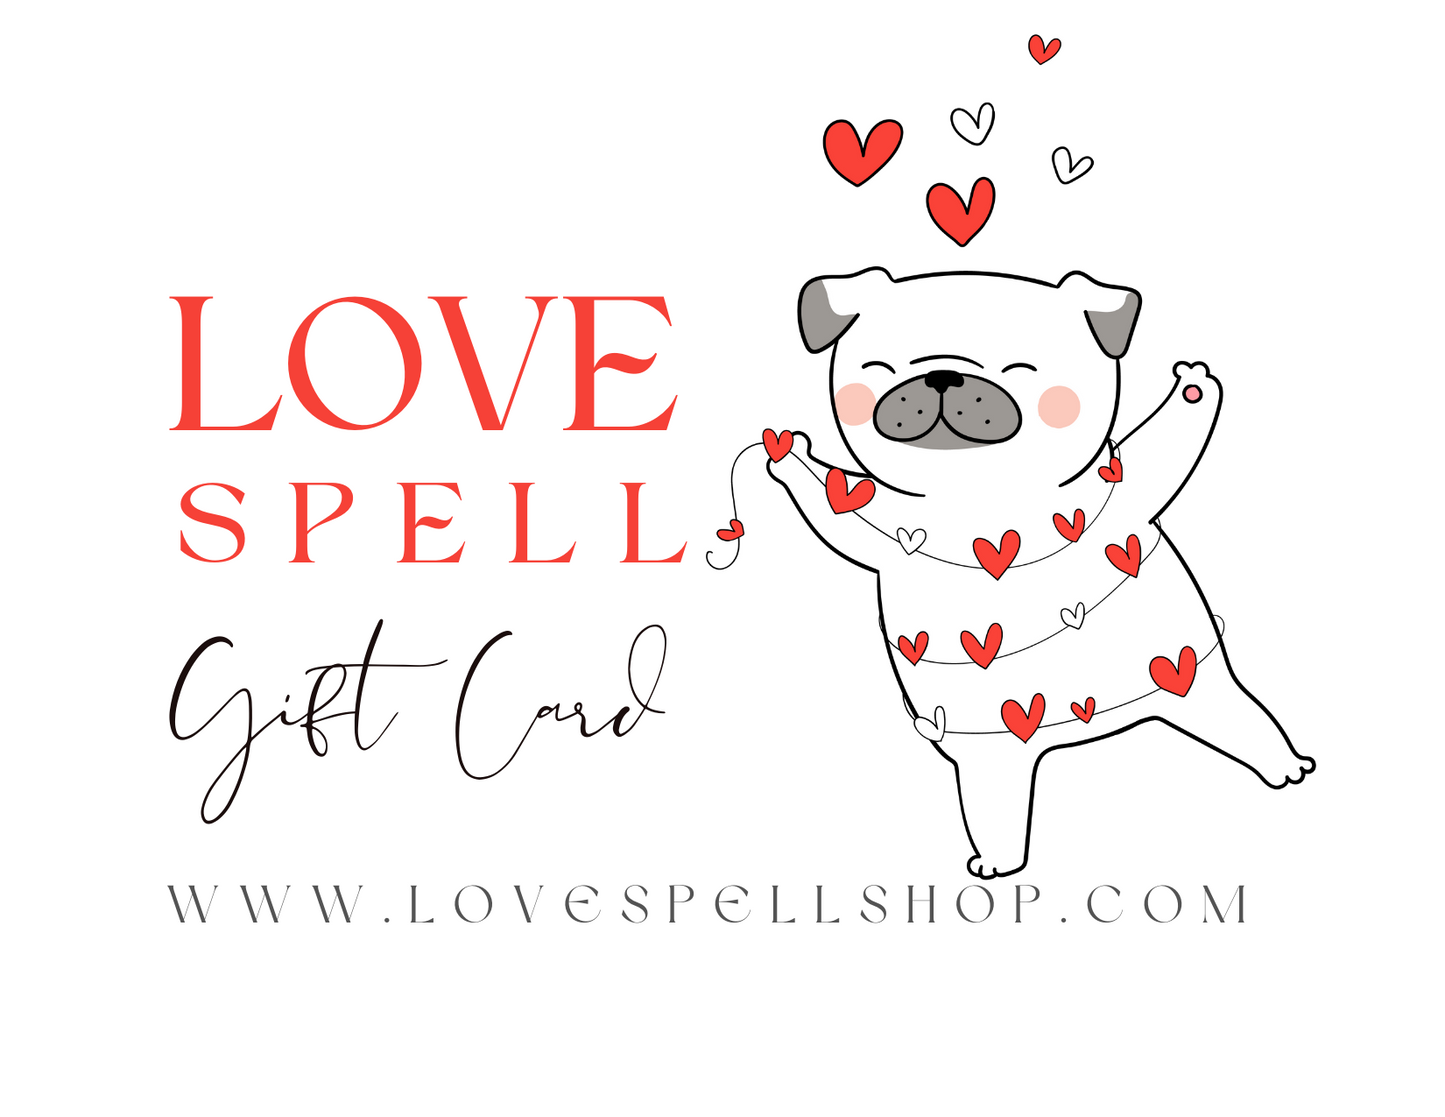 Love Spell Digital Gift Card (Dog Wrapped in Hearts)